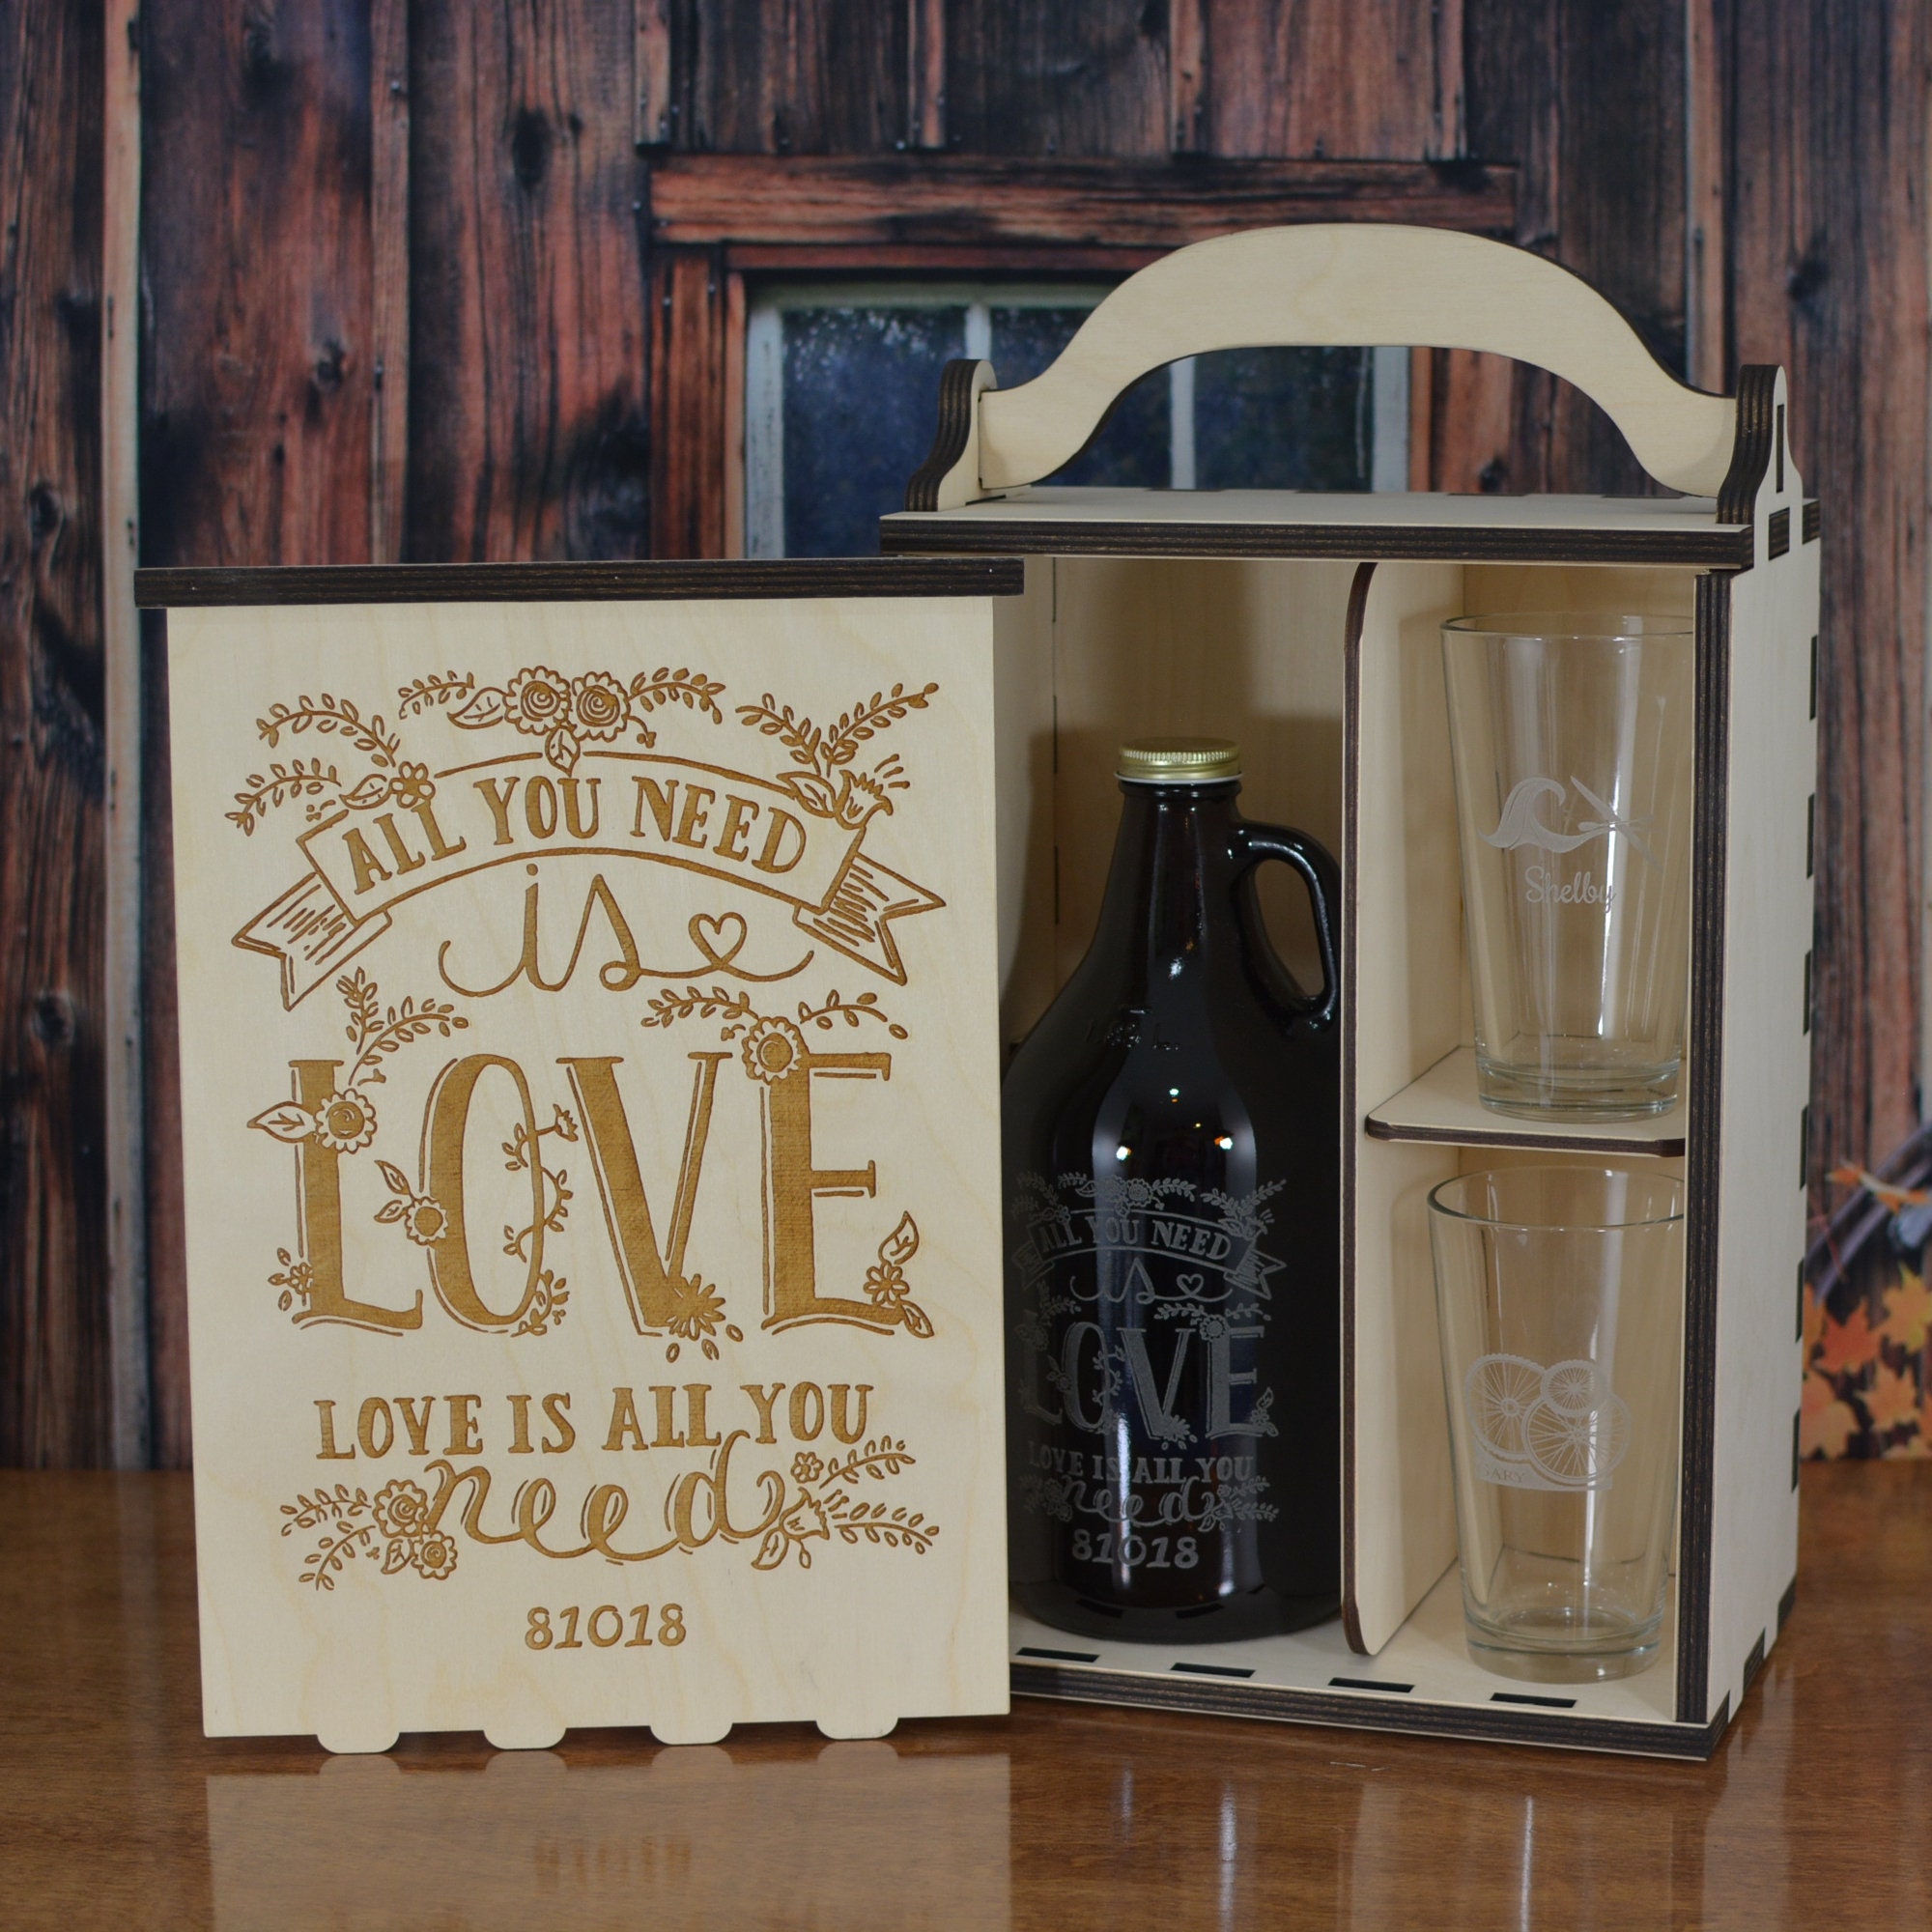 All You Need Is Love Personalized 16 oz Beer Can Glass